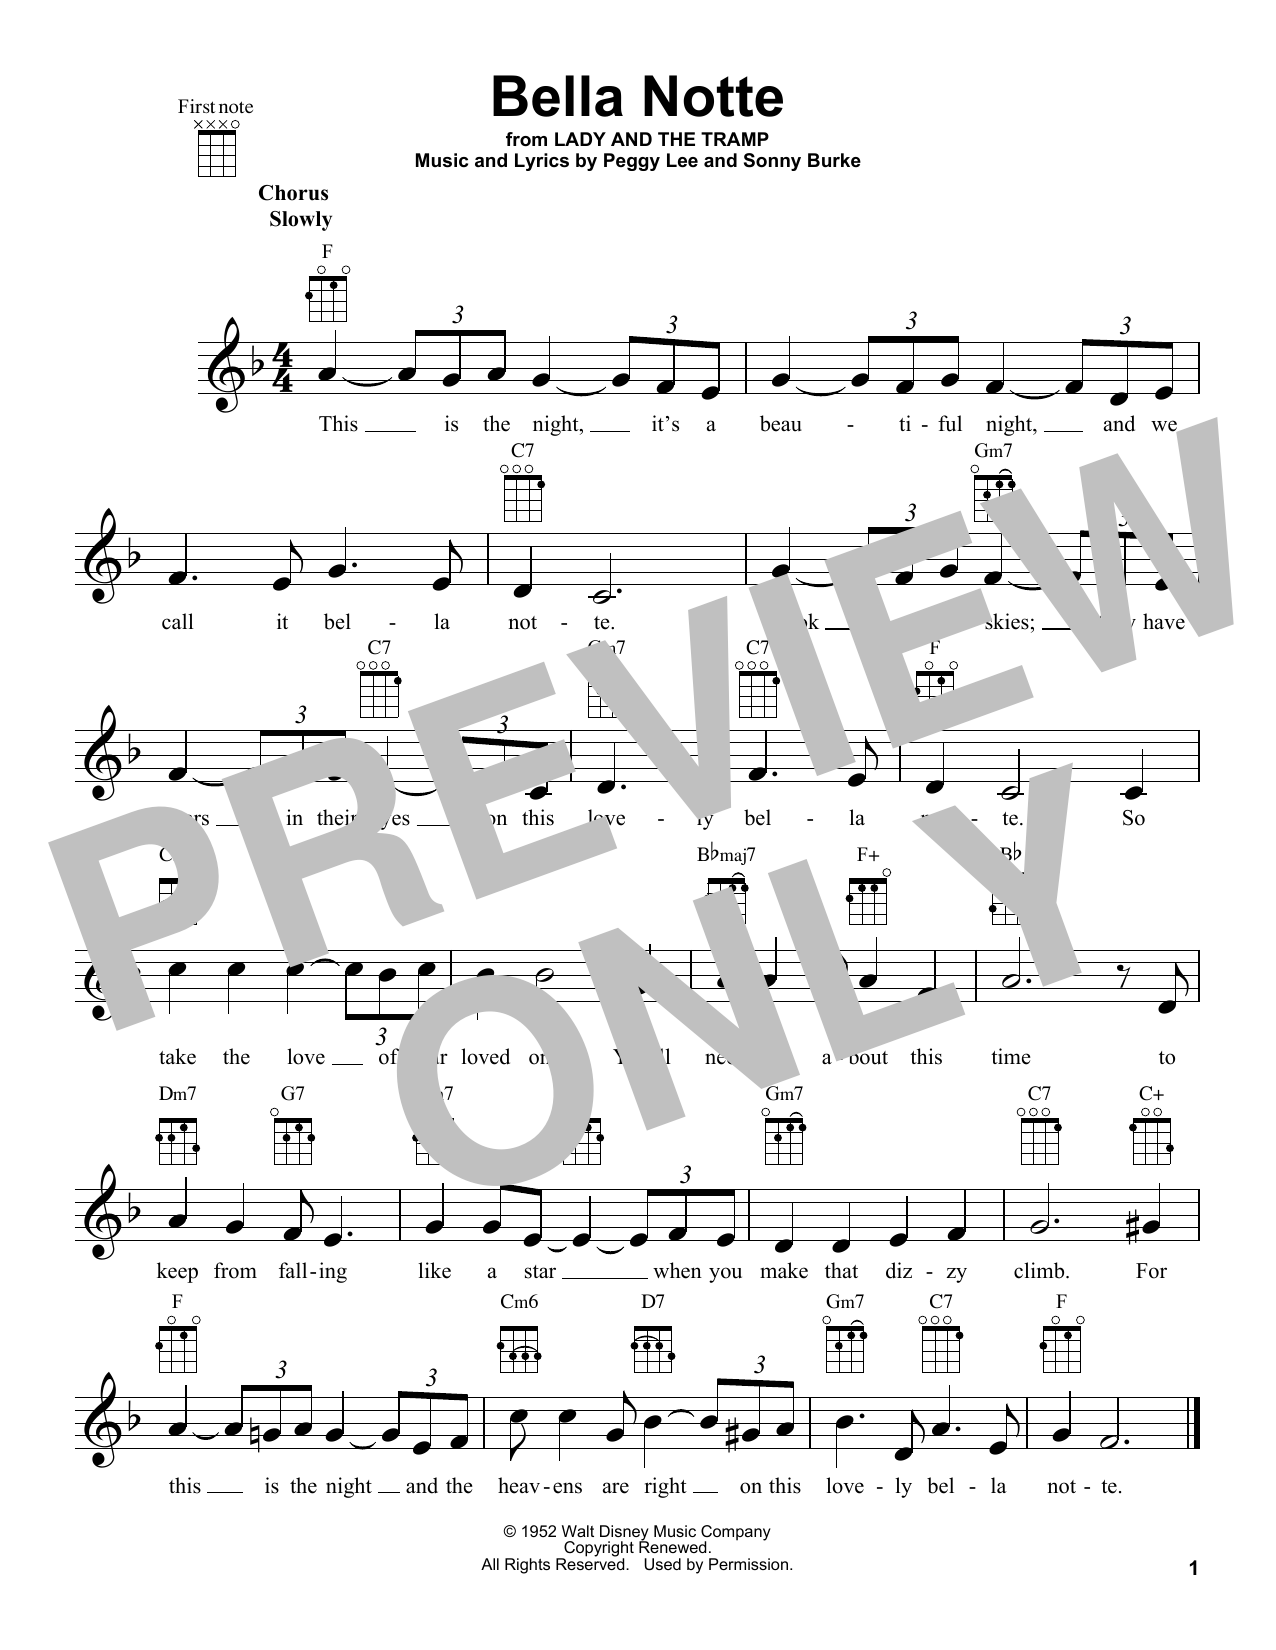 Download Peggy Lee Bella Notte (from Lady And The Tramp) Sheet Music